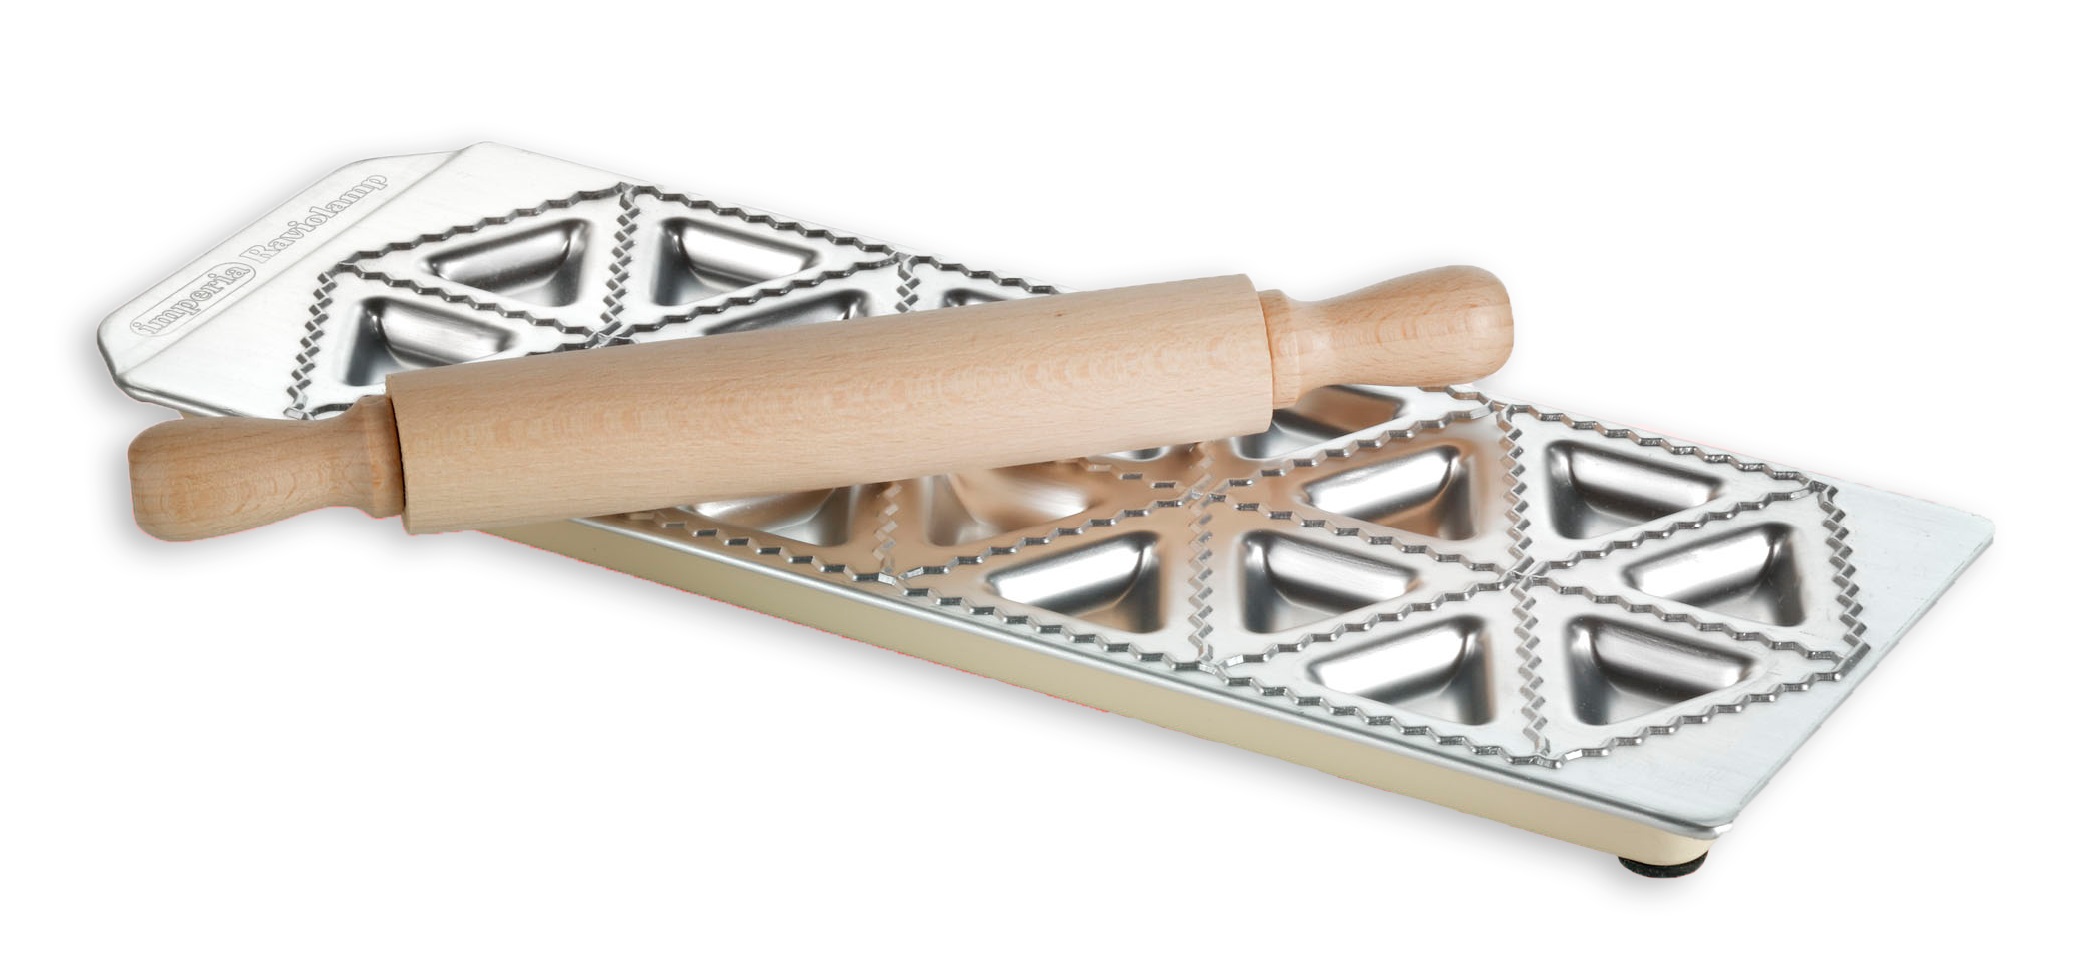 Imperia Ravioli Maker / Ravioli Mould with Rolling Pin   18 Sections